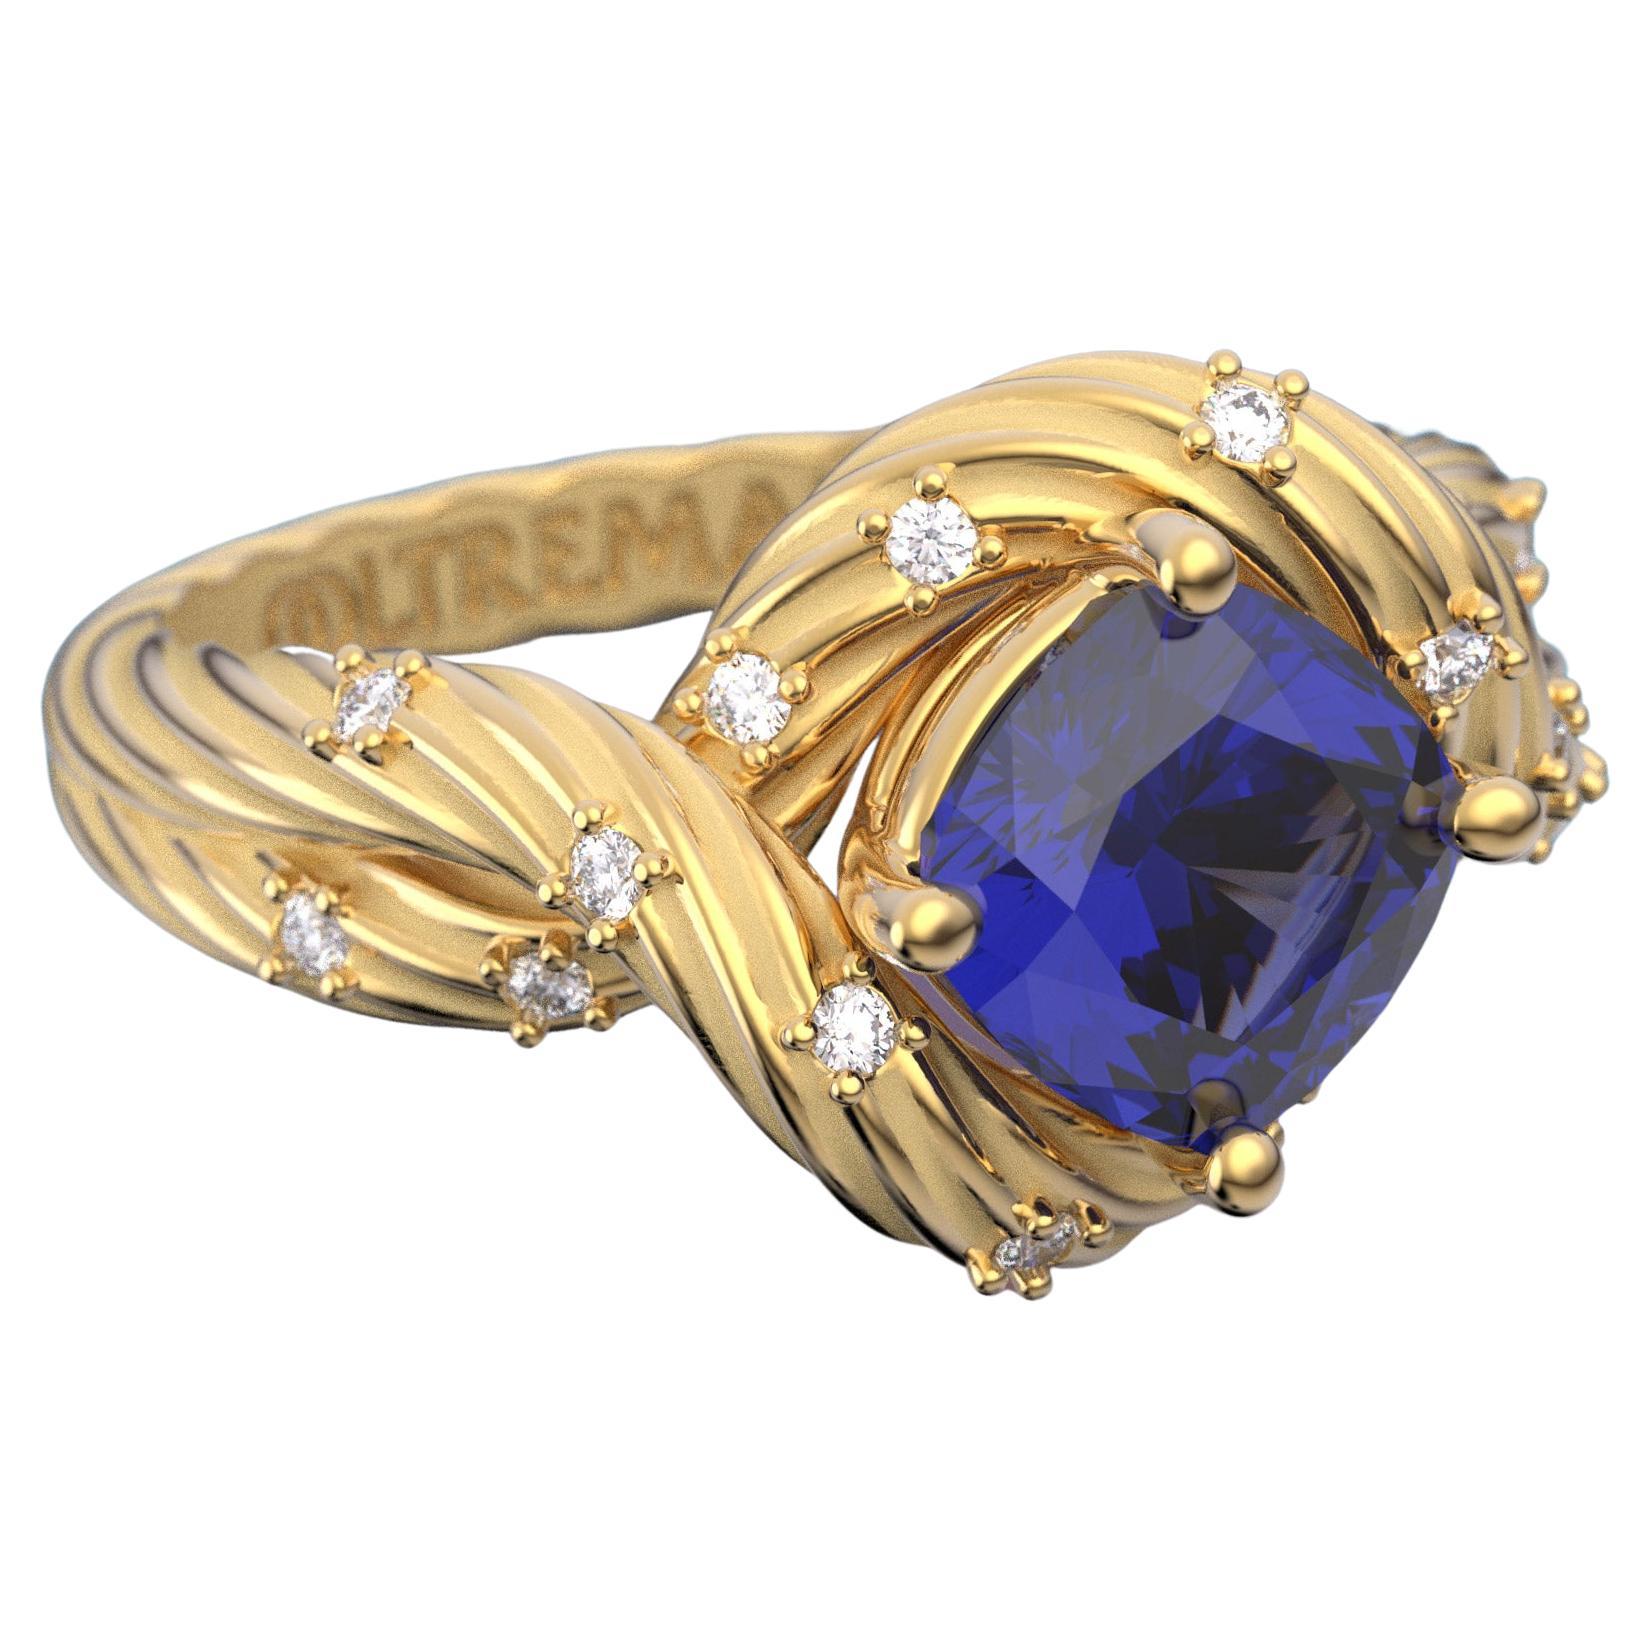 For Sale:  Tanzanite and Diamonds Ring 14k Solid Gold, Italian Fine Jewelry, made to order.